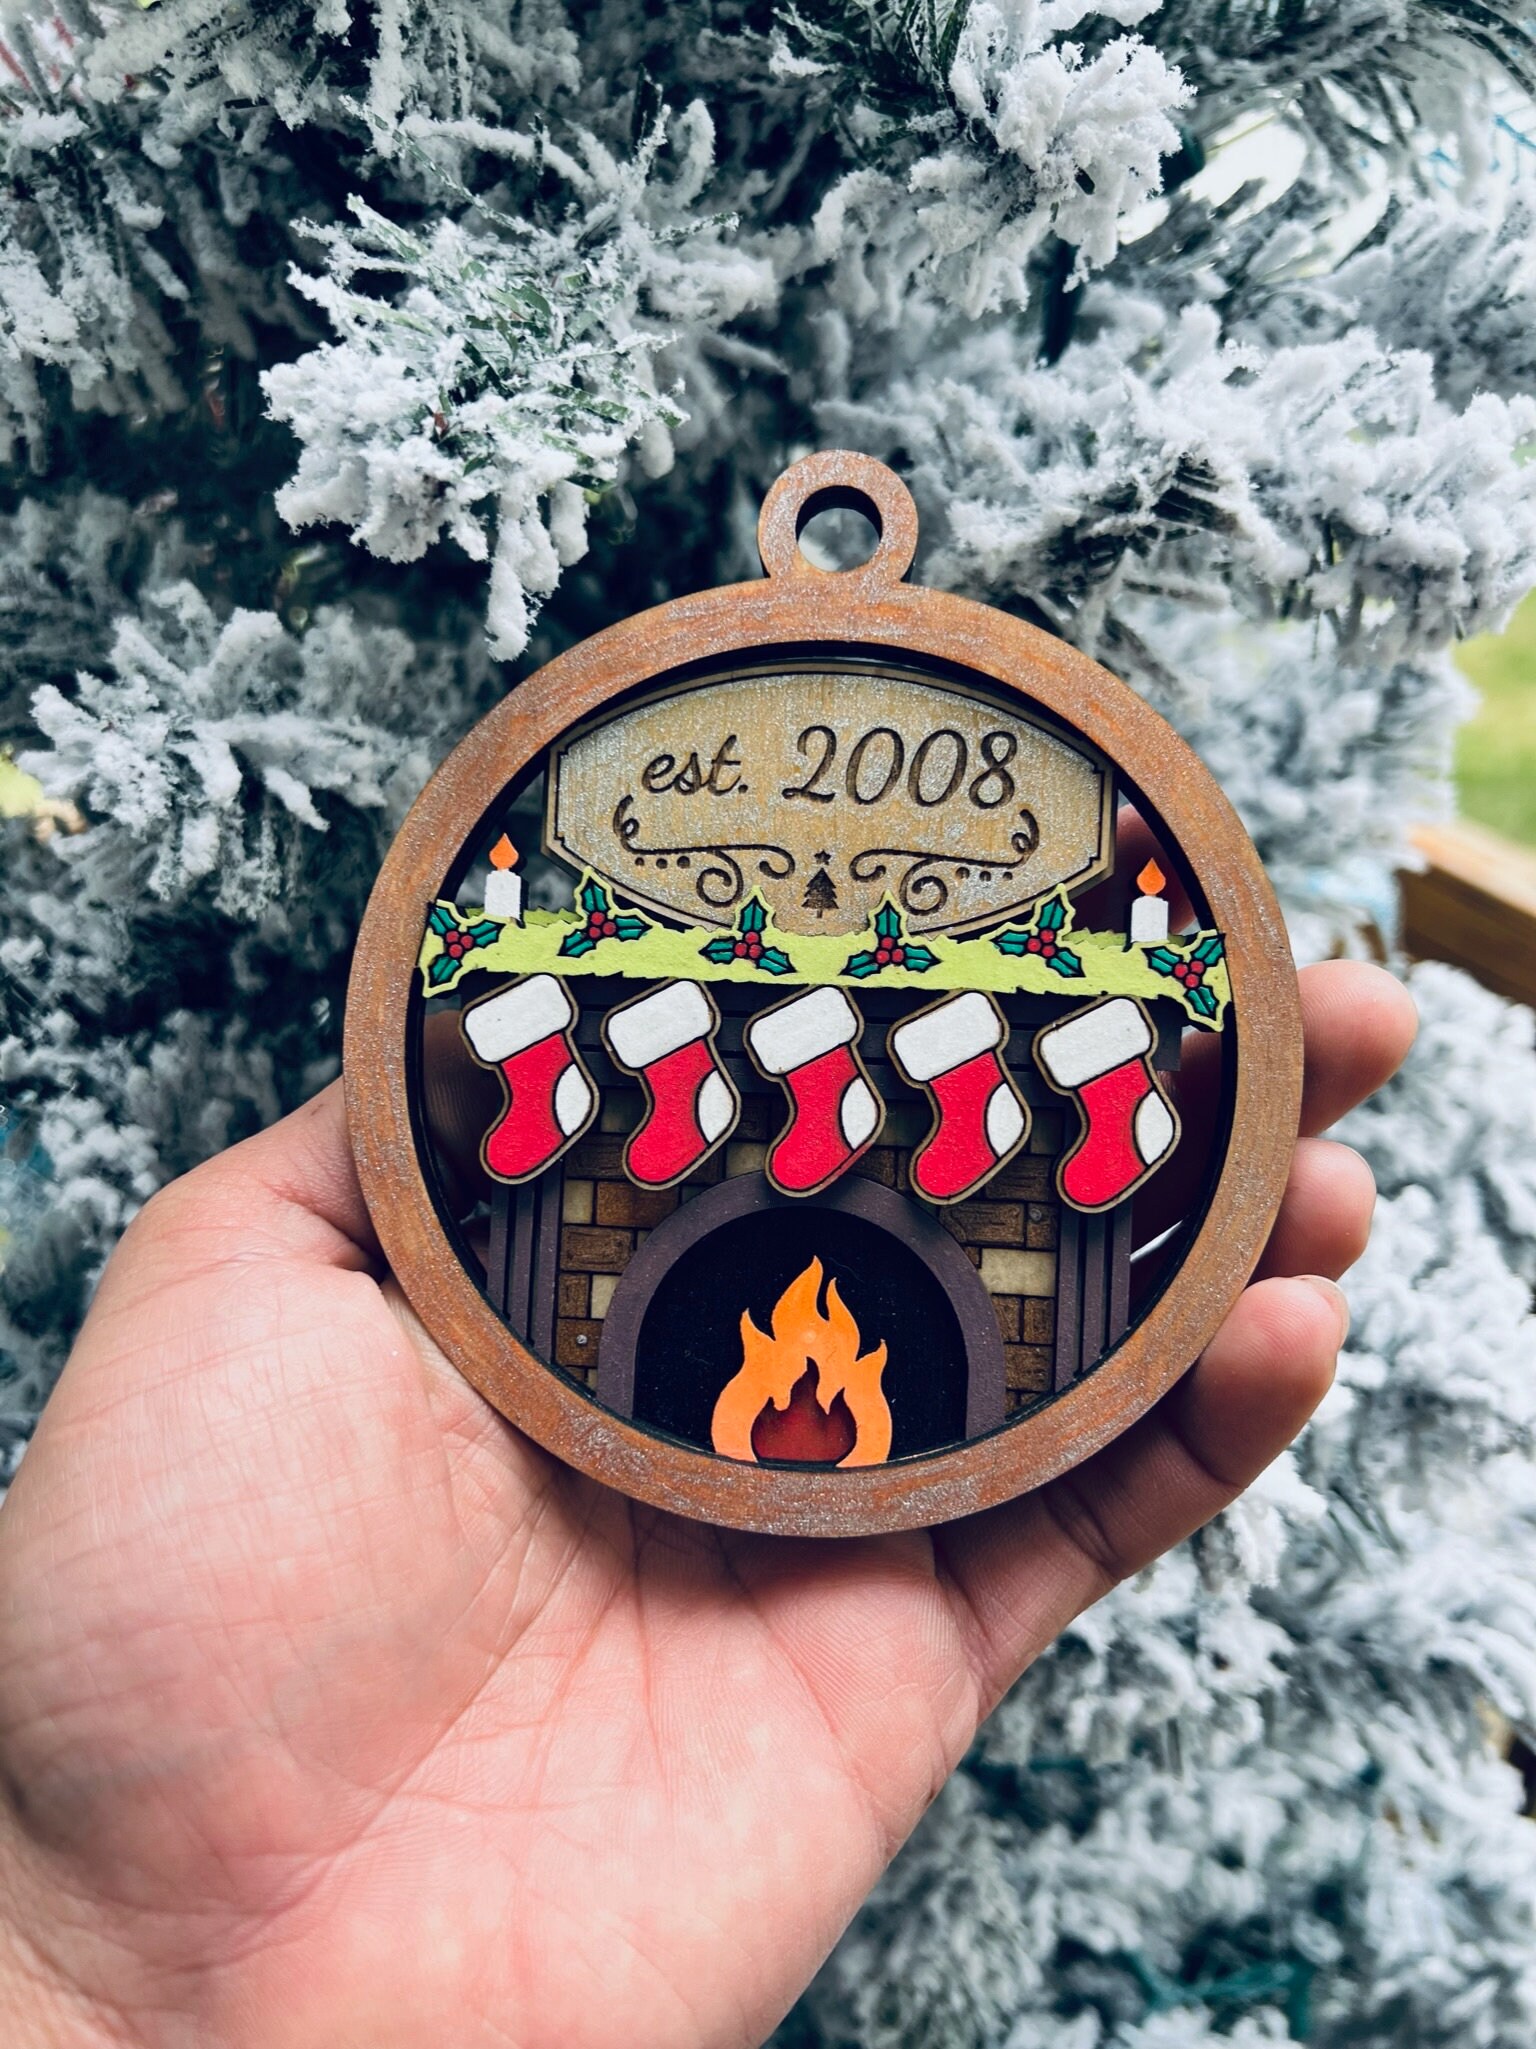 Wilderness Wood Christmas Ornaments Personalized, Christmas